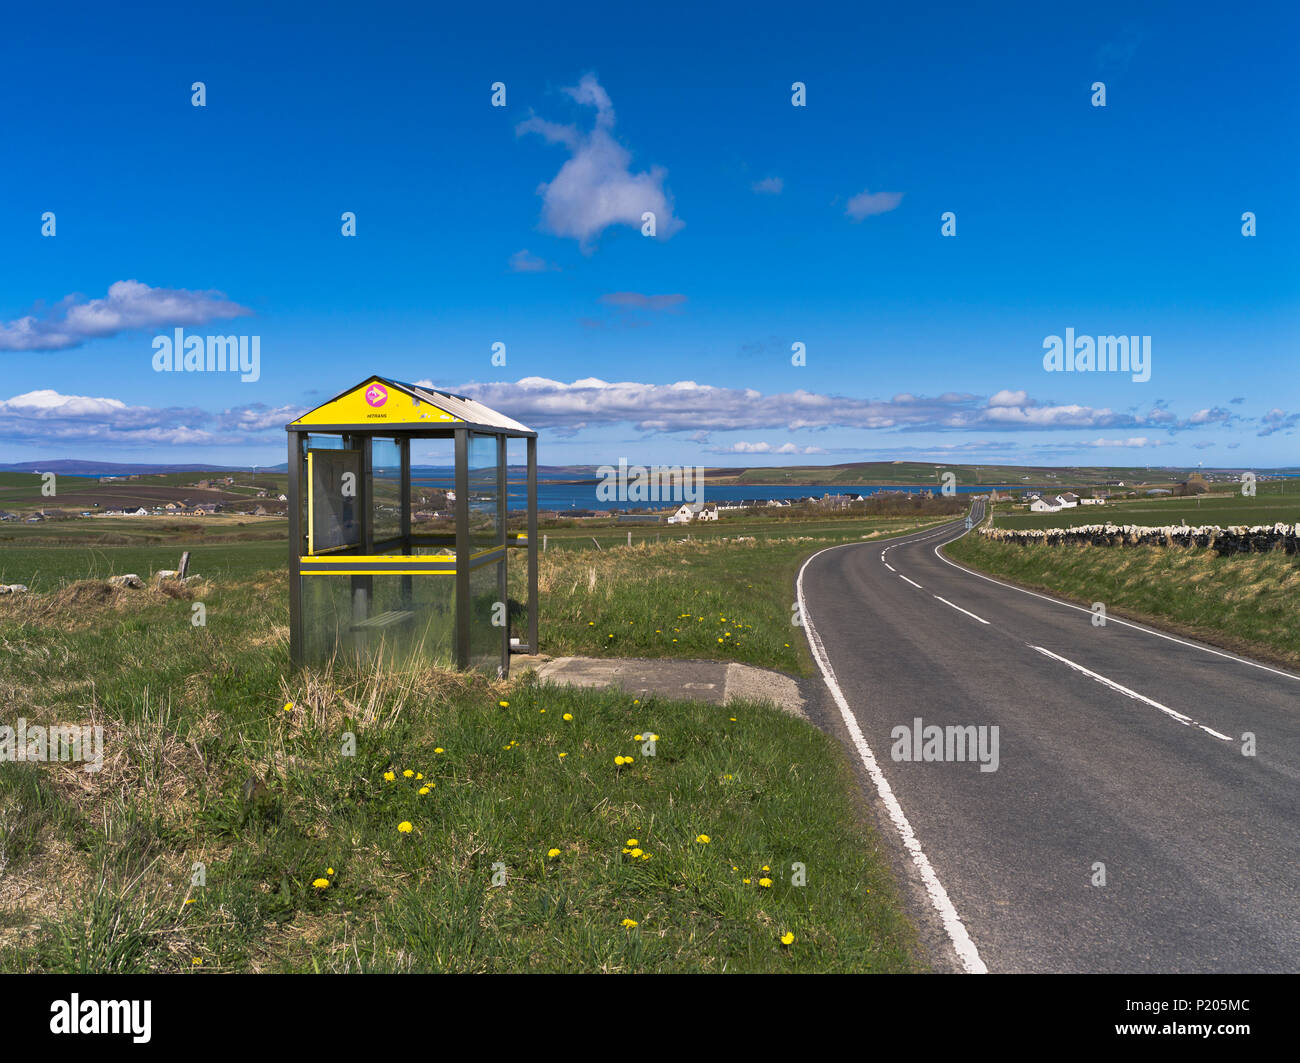 dh Scottish bus stop SOUTH RONALDAY ORKNEY Local rural bus shelter stops Scotland isles countryside uk outdoor Stock Photo